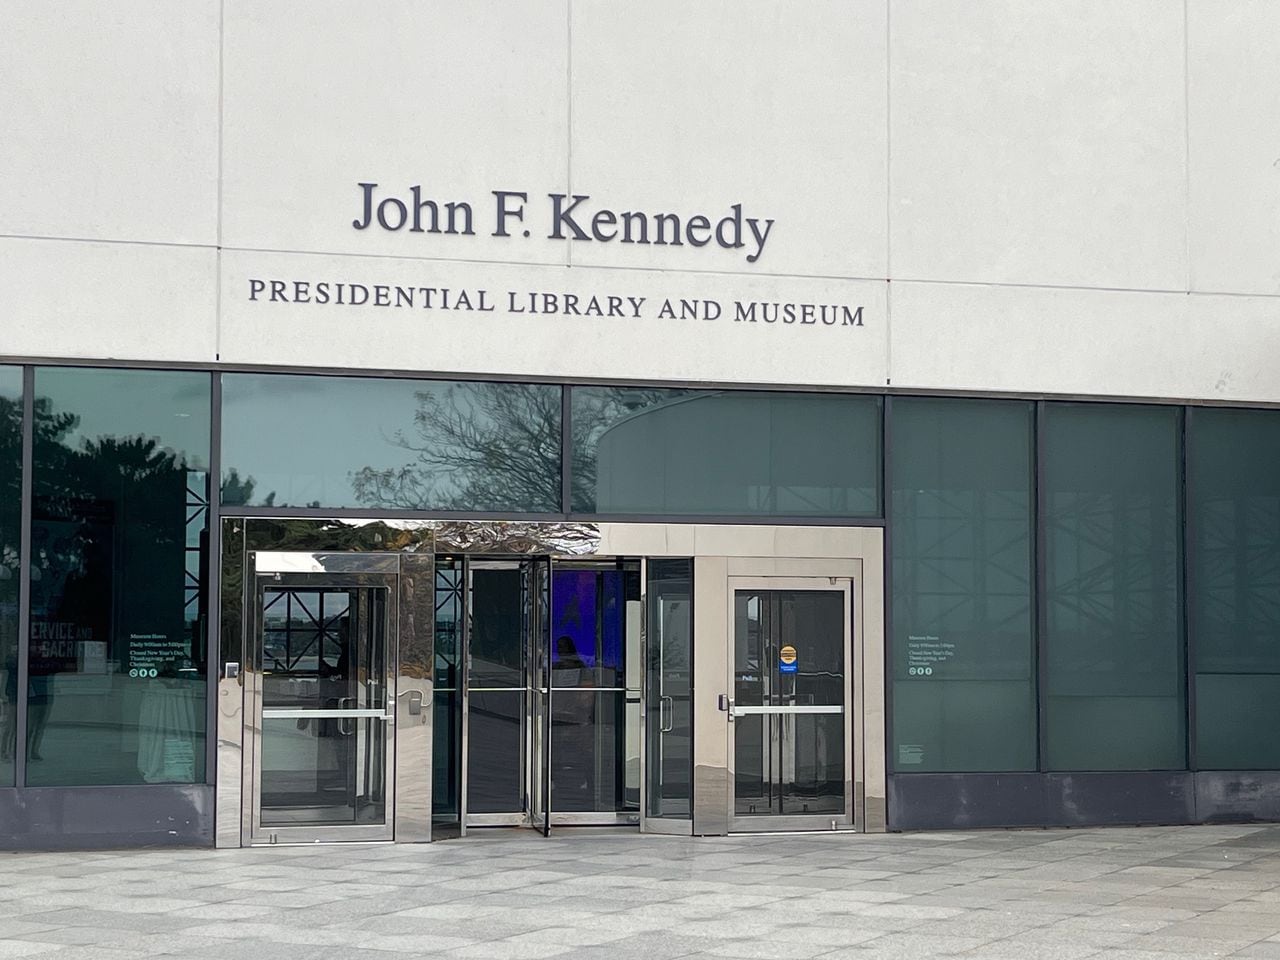 The exterior of the John F. Kennedy Presidential Library and Museum on the campus of UMass Boston (MassLive photo by John L. Micek).